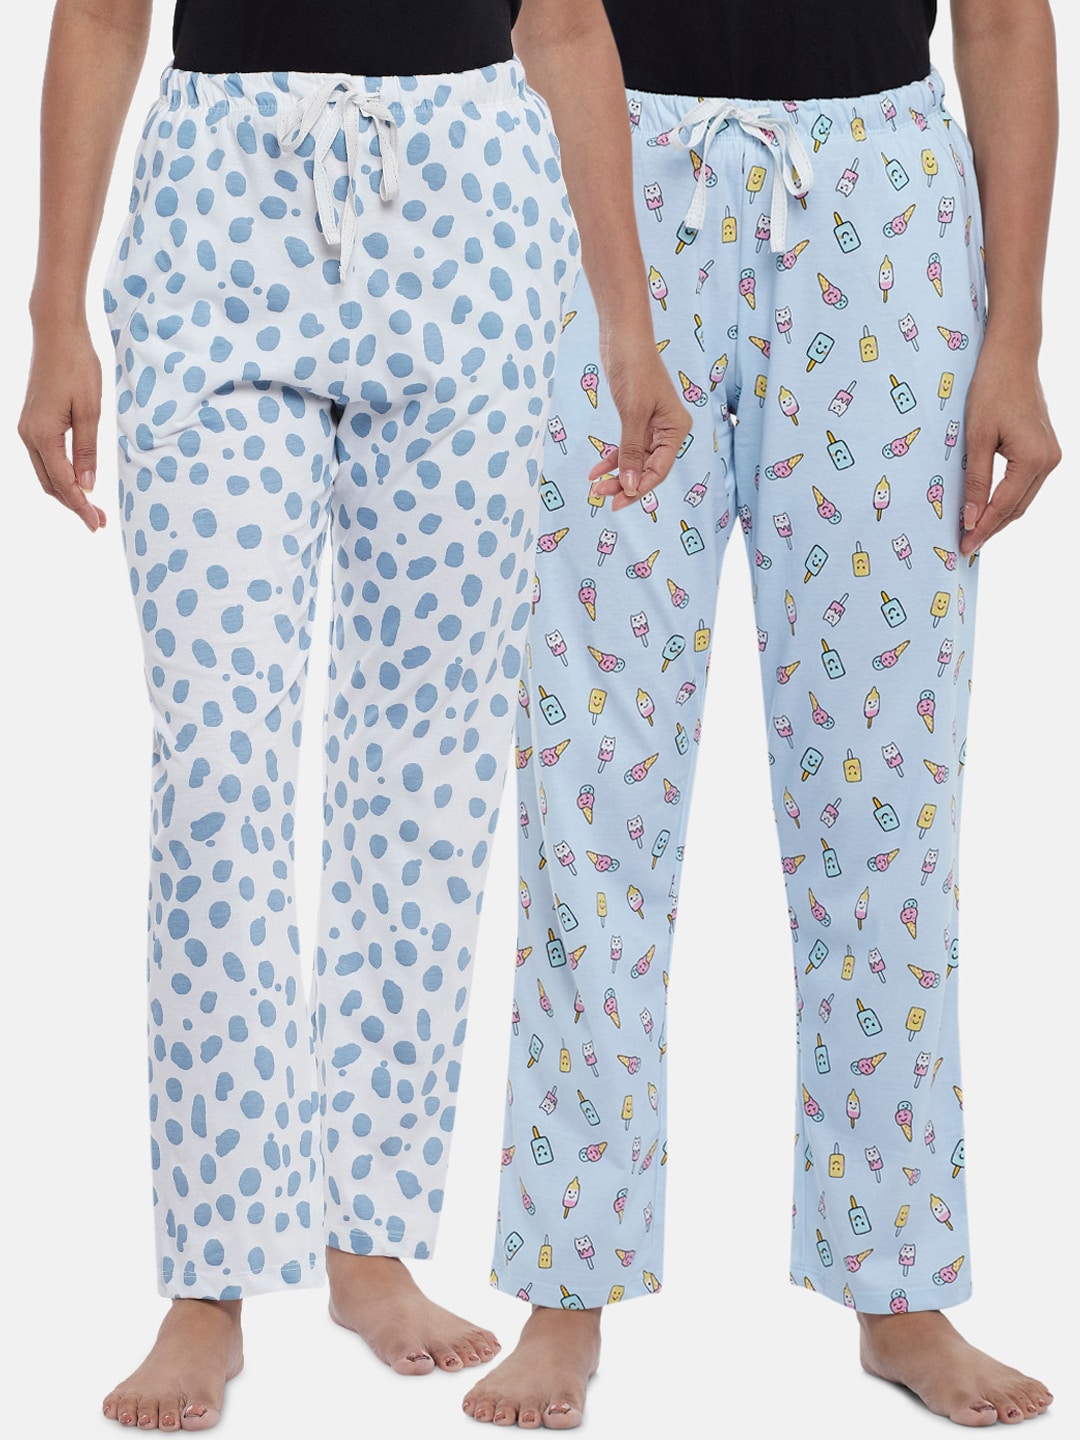 Dreamz by Pantaloons Women Set Of 2 Turquoise Blue & White Printed Cotton Lounge Pants Price in India